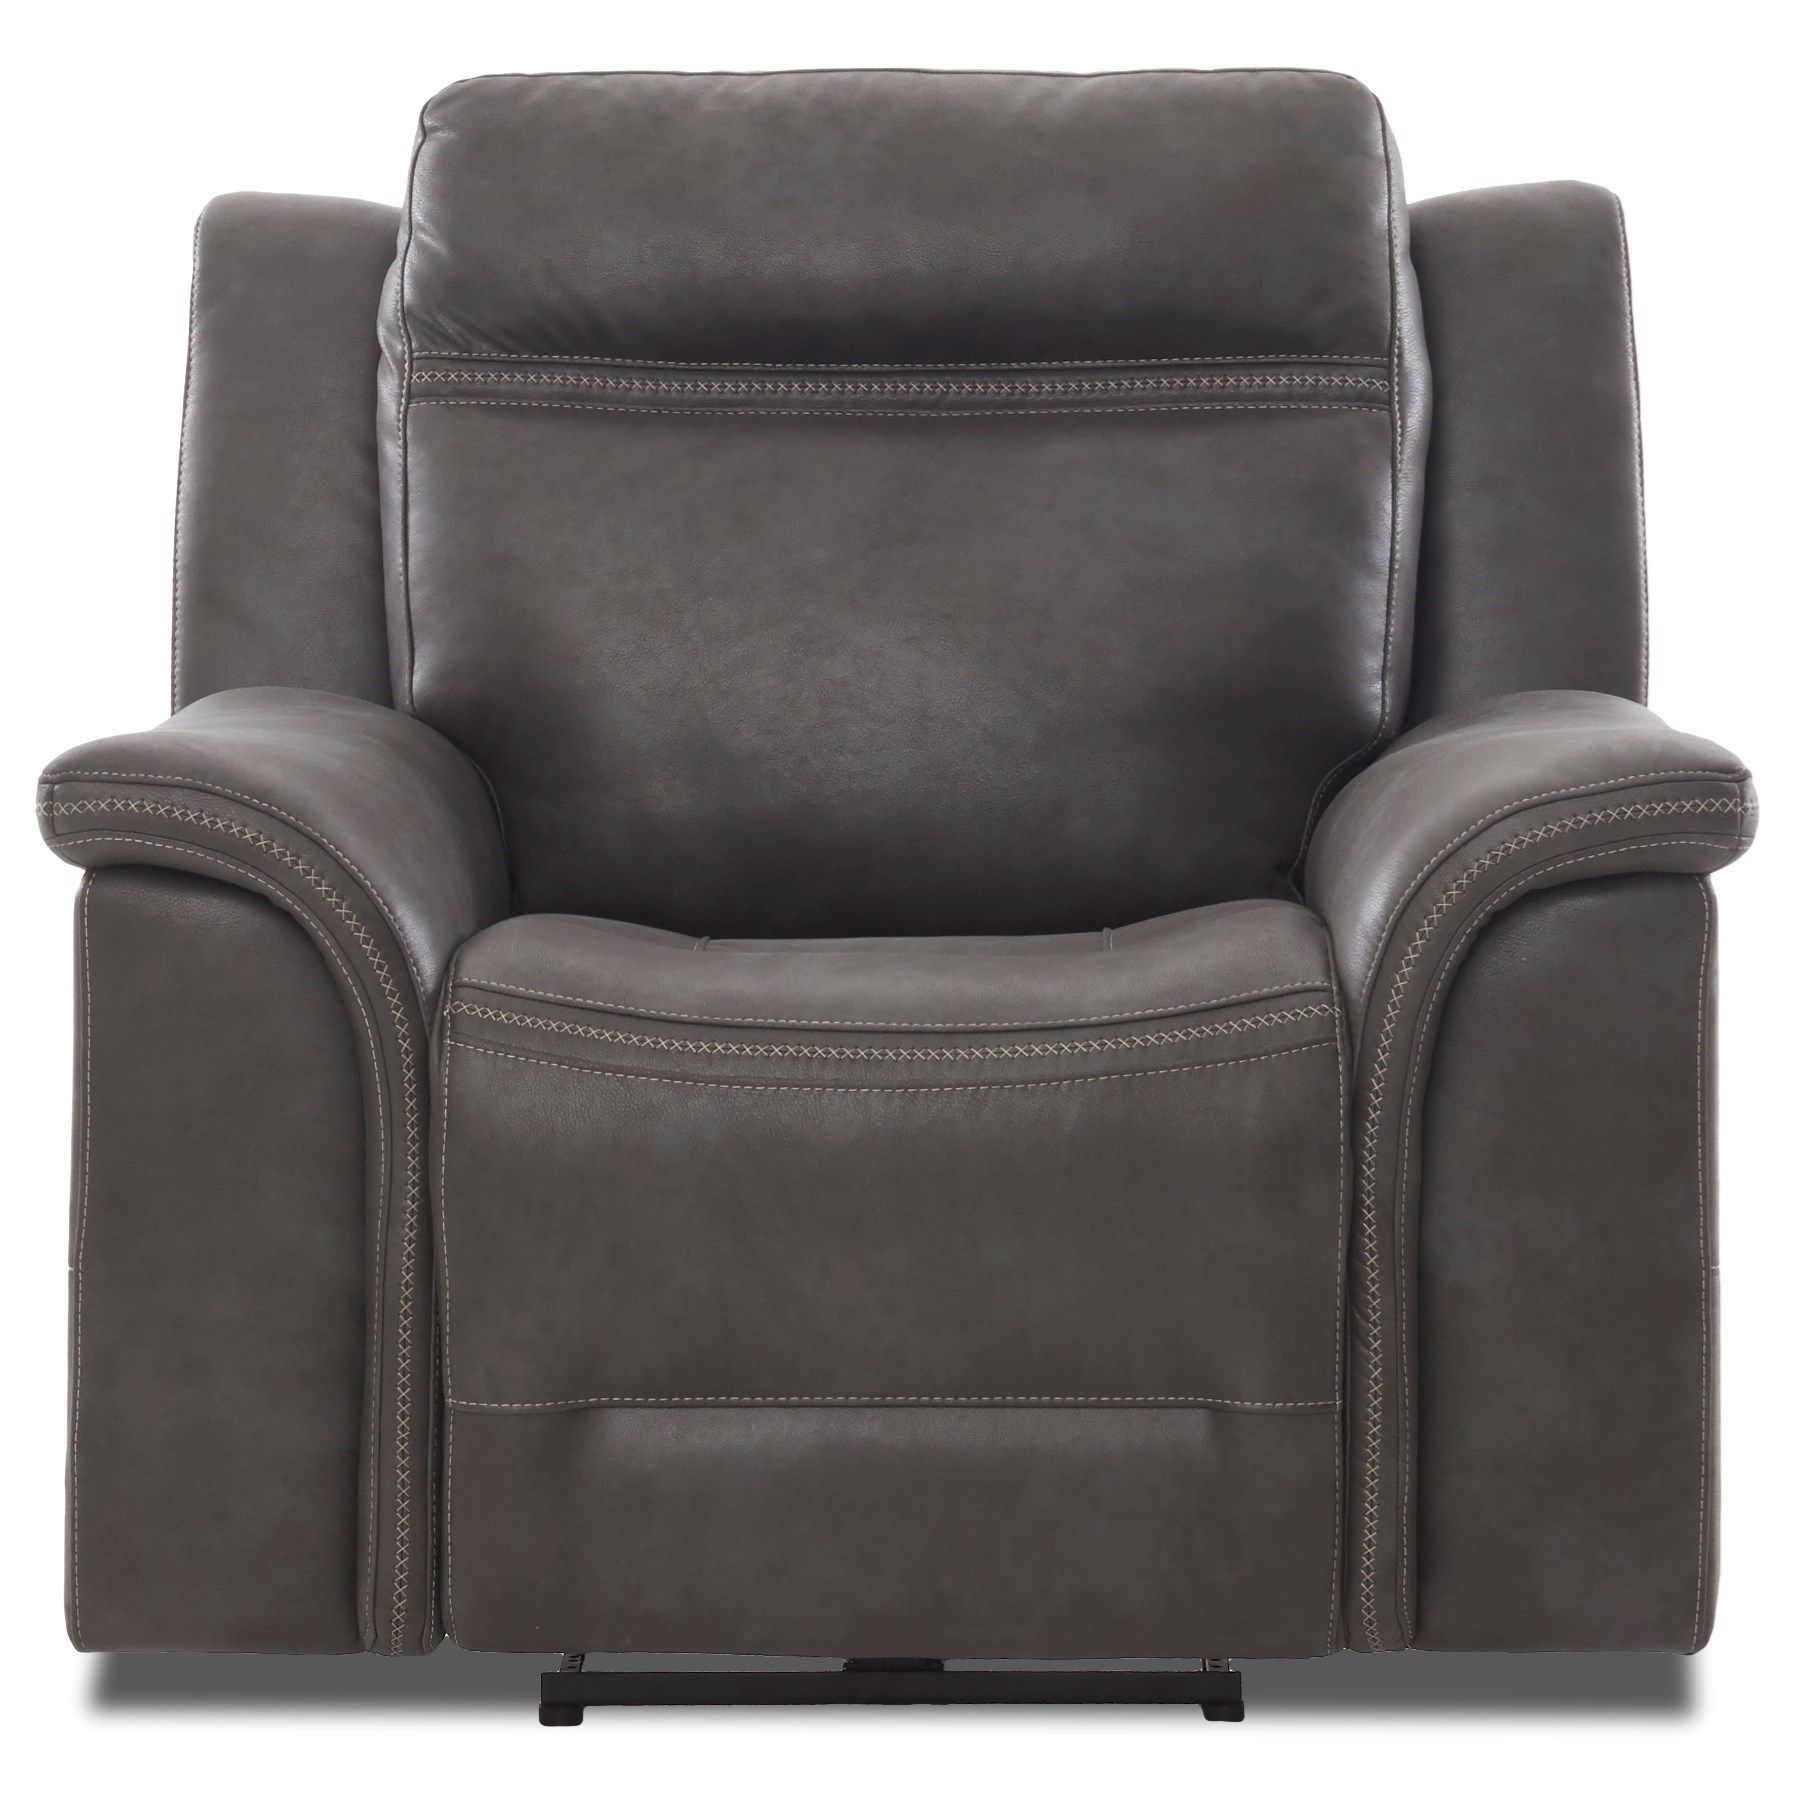 Klaussner International Huxley Huxley Pwrc Performance For Ansby Barrel Chairs (View 13 of 15)